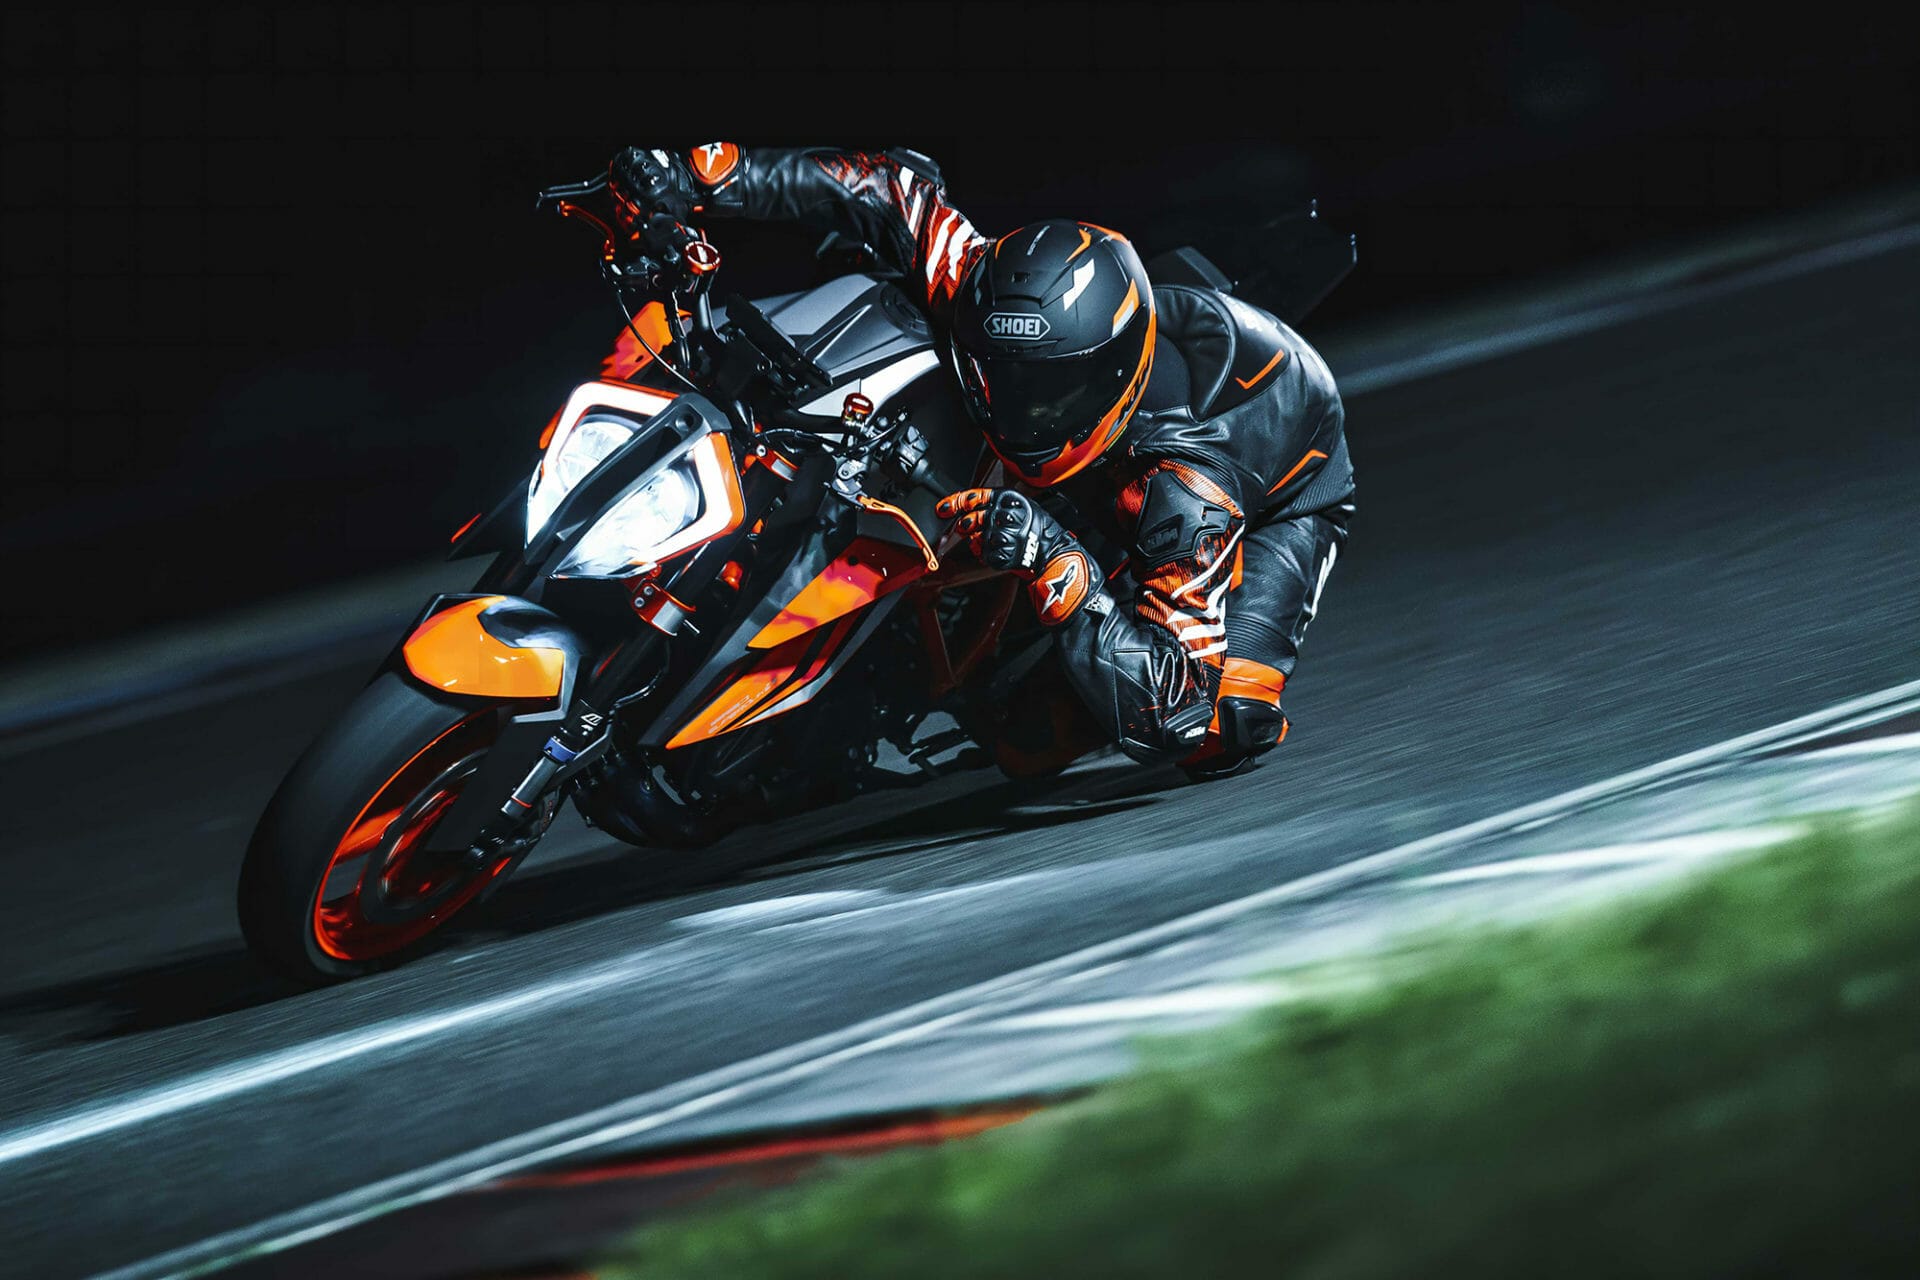 KTM 1290 Super Duke R and EVO for 2022 - The Beast Evolved
- also in the MOTORCYCLES.NEWS APP